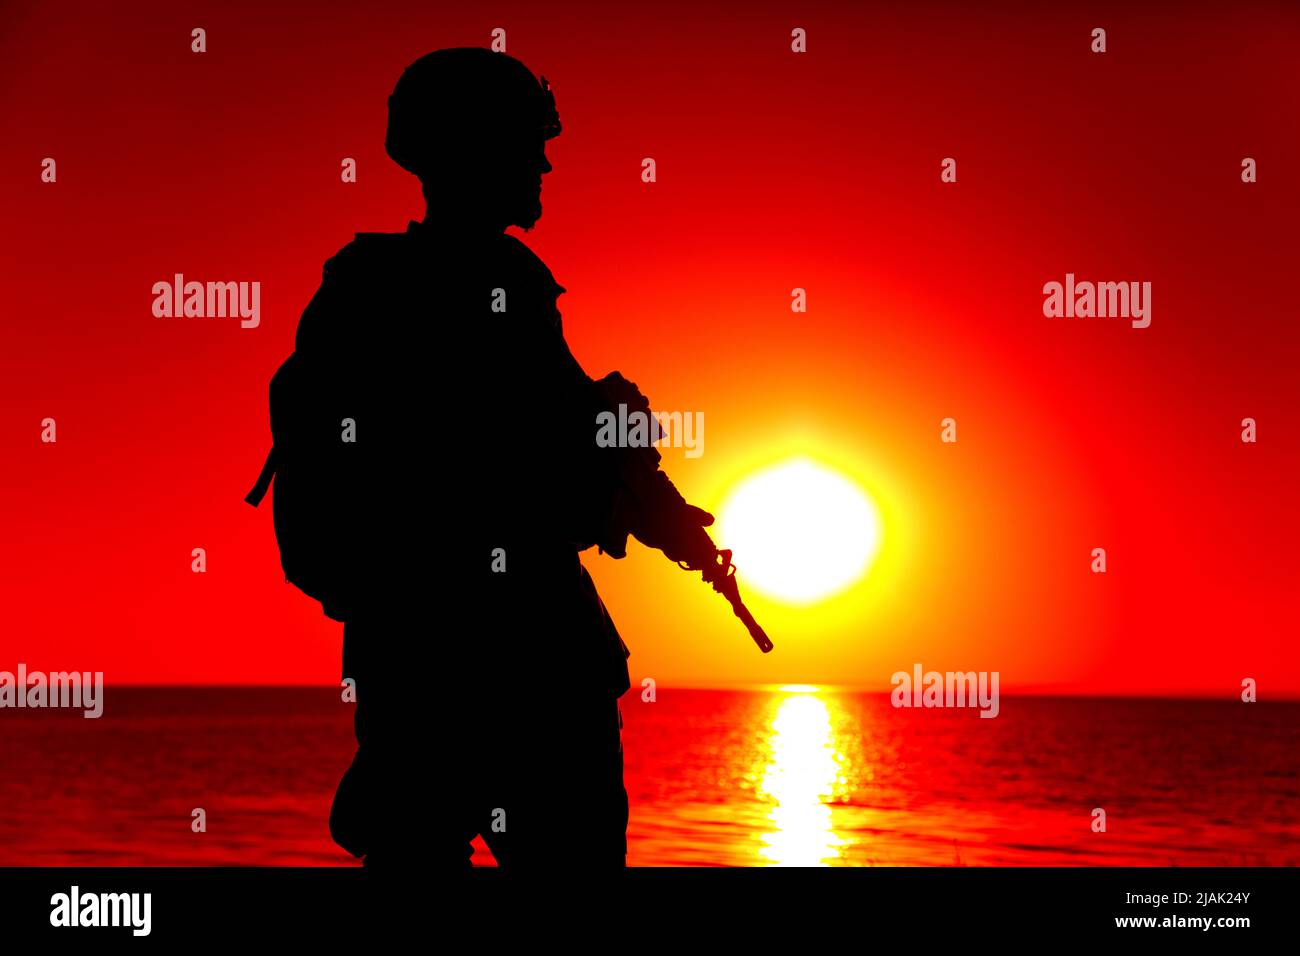 Silhouette of rifleman standing on ocean coastline, patrolling at sunset. Stock Photo